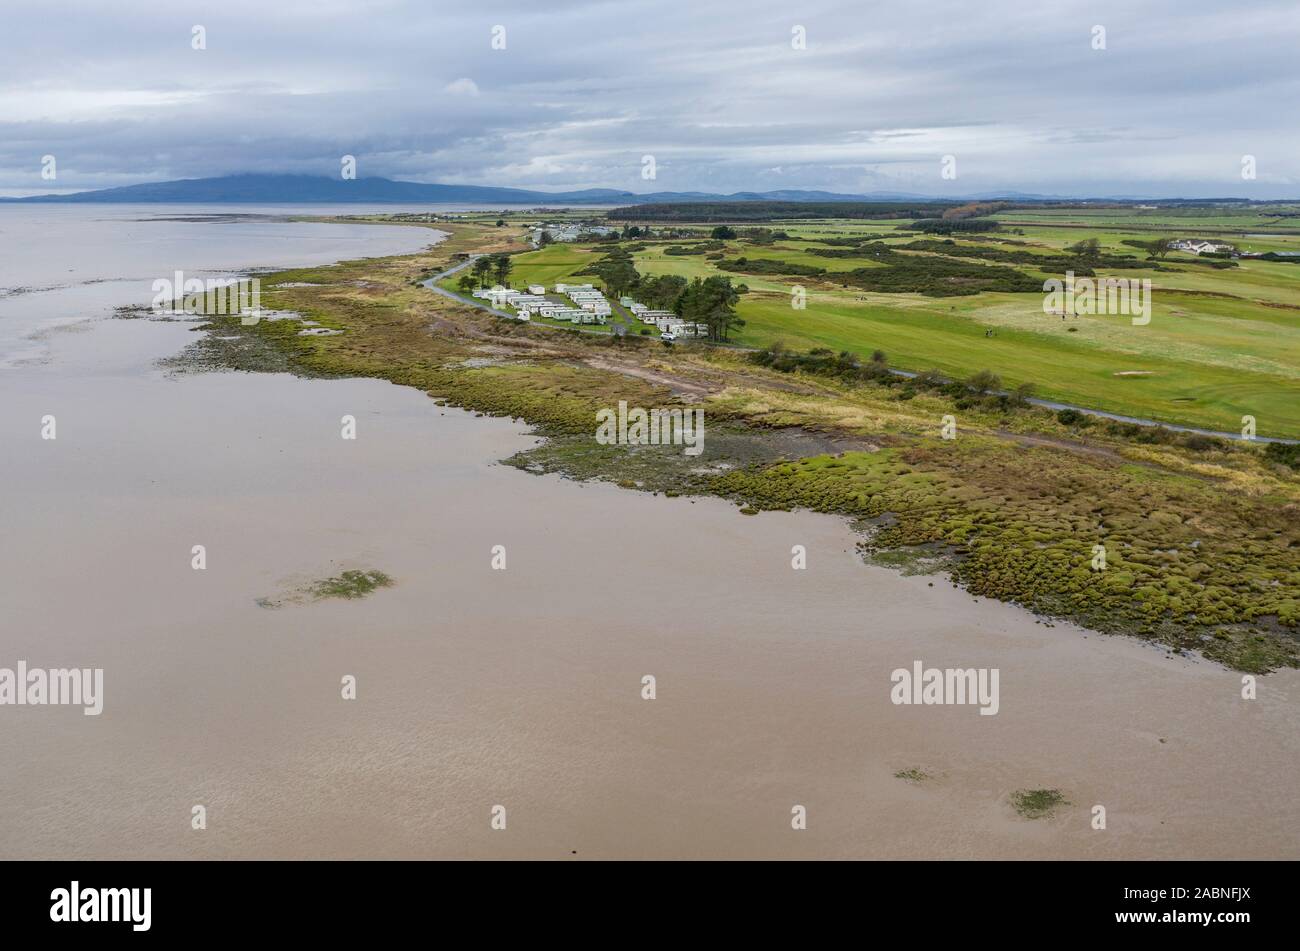 An aerial view of the village of Powfoot, Dumfries and Galloway on the Solway Firth, Scotland. Stock Photo